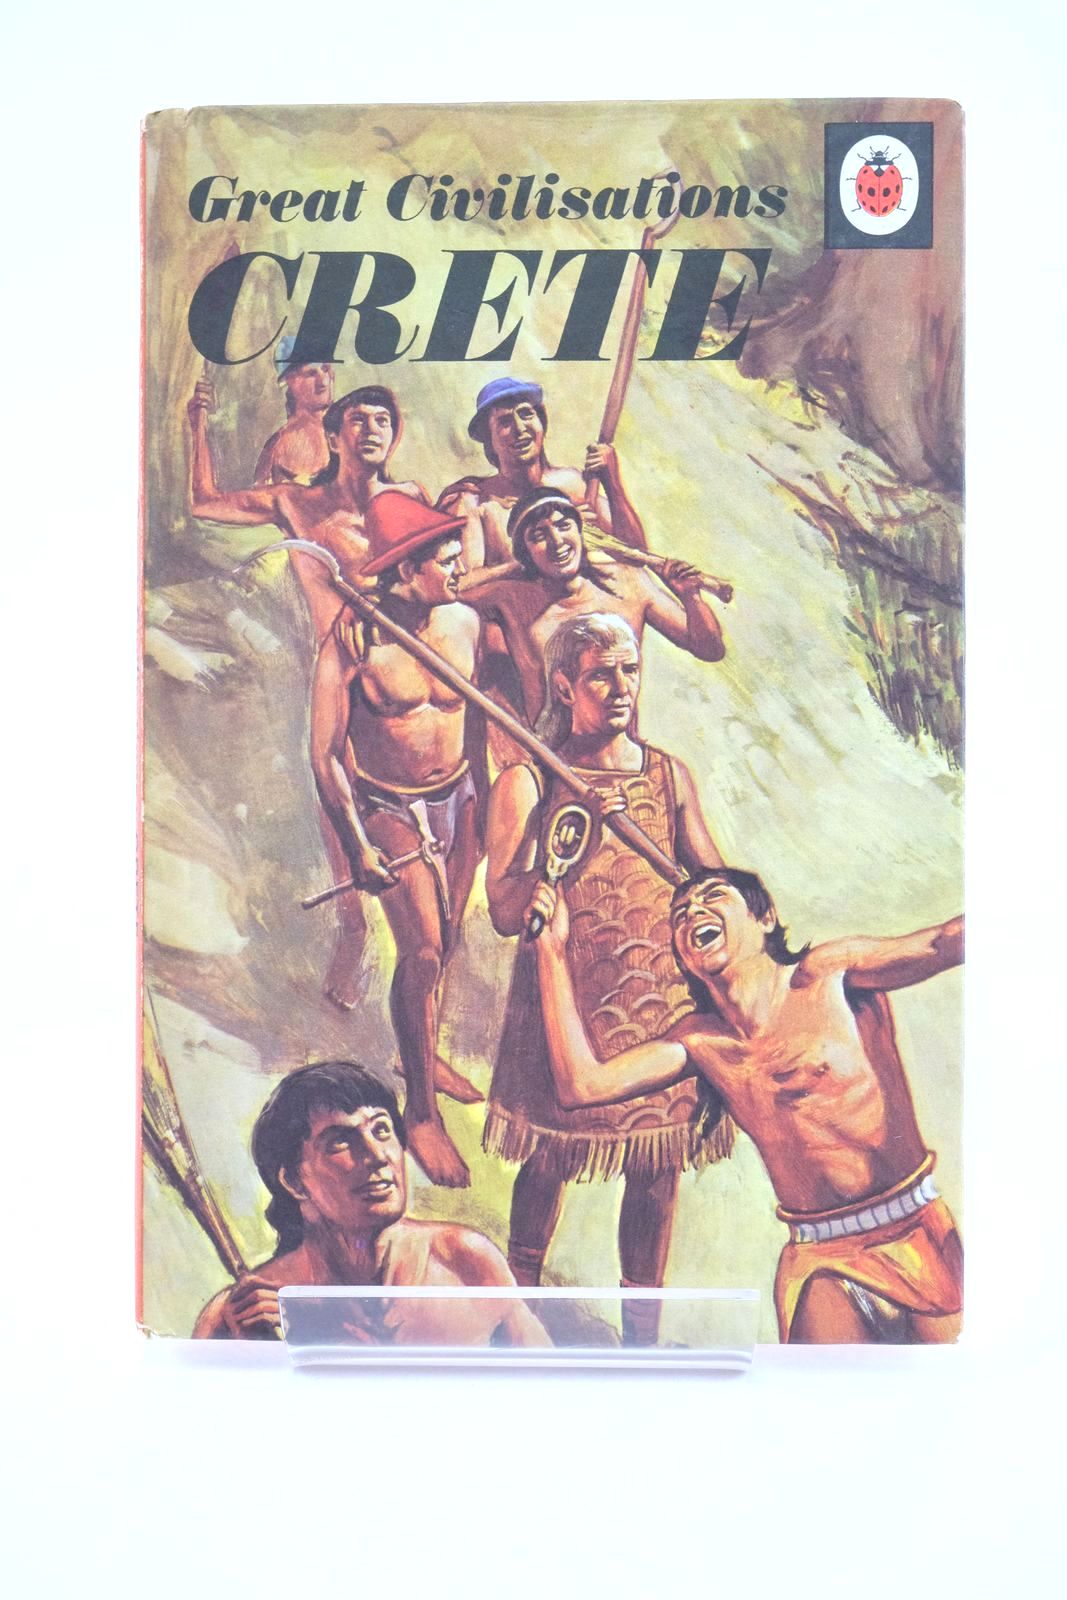 Photo of GREAT CIVILISATIONS: CRETE written by Greig, Clarence illustrated by Nunez, Jorge published by Ladybird Books Ltd (STOCK CODE: 1324400)  for sale by Stella & Rose's Books